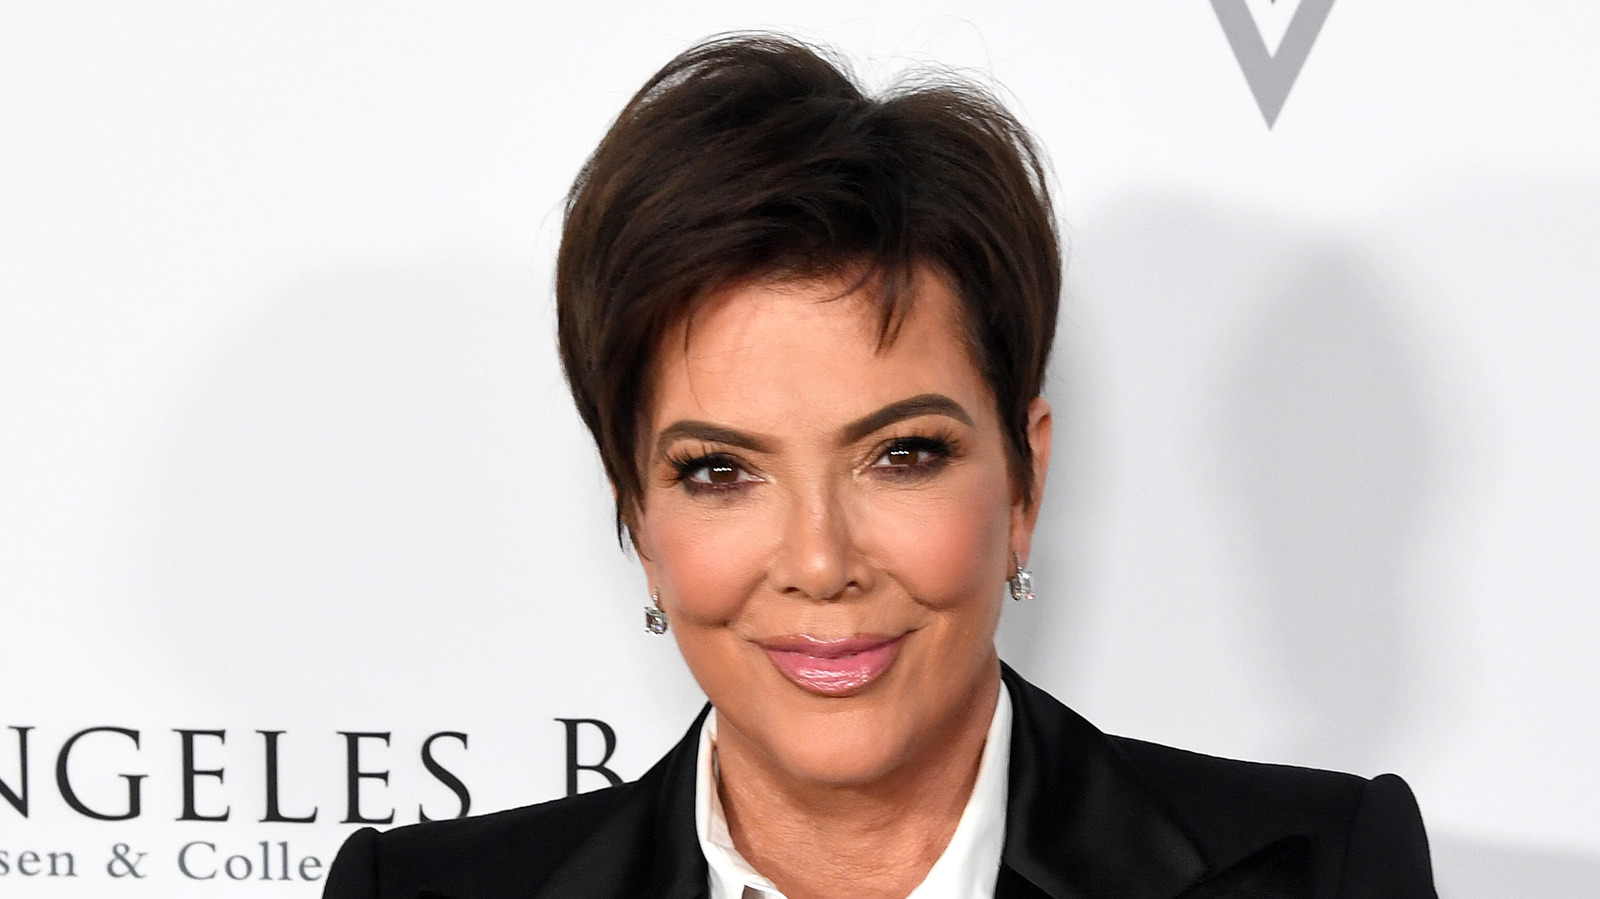 What Kris Jenner's New Biography Reveals About Her Life